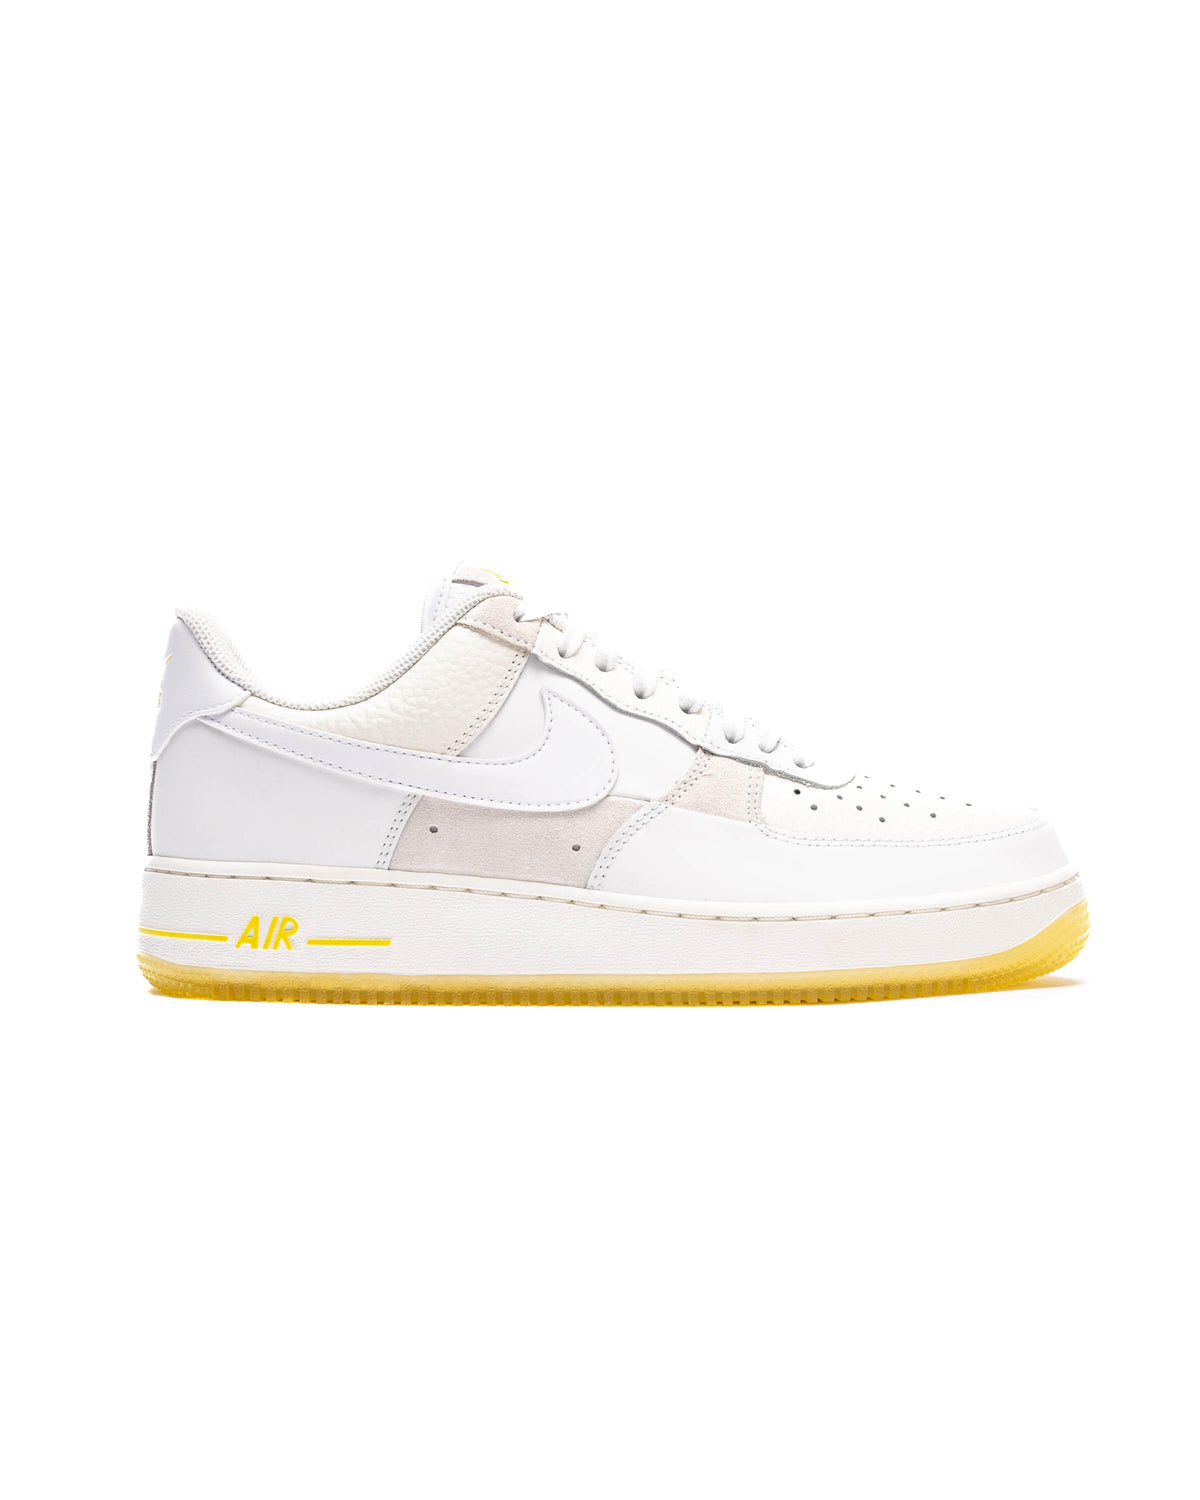 Nike WMNS AIR FORCE 1 '07 LOW 'Sun Activated'